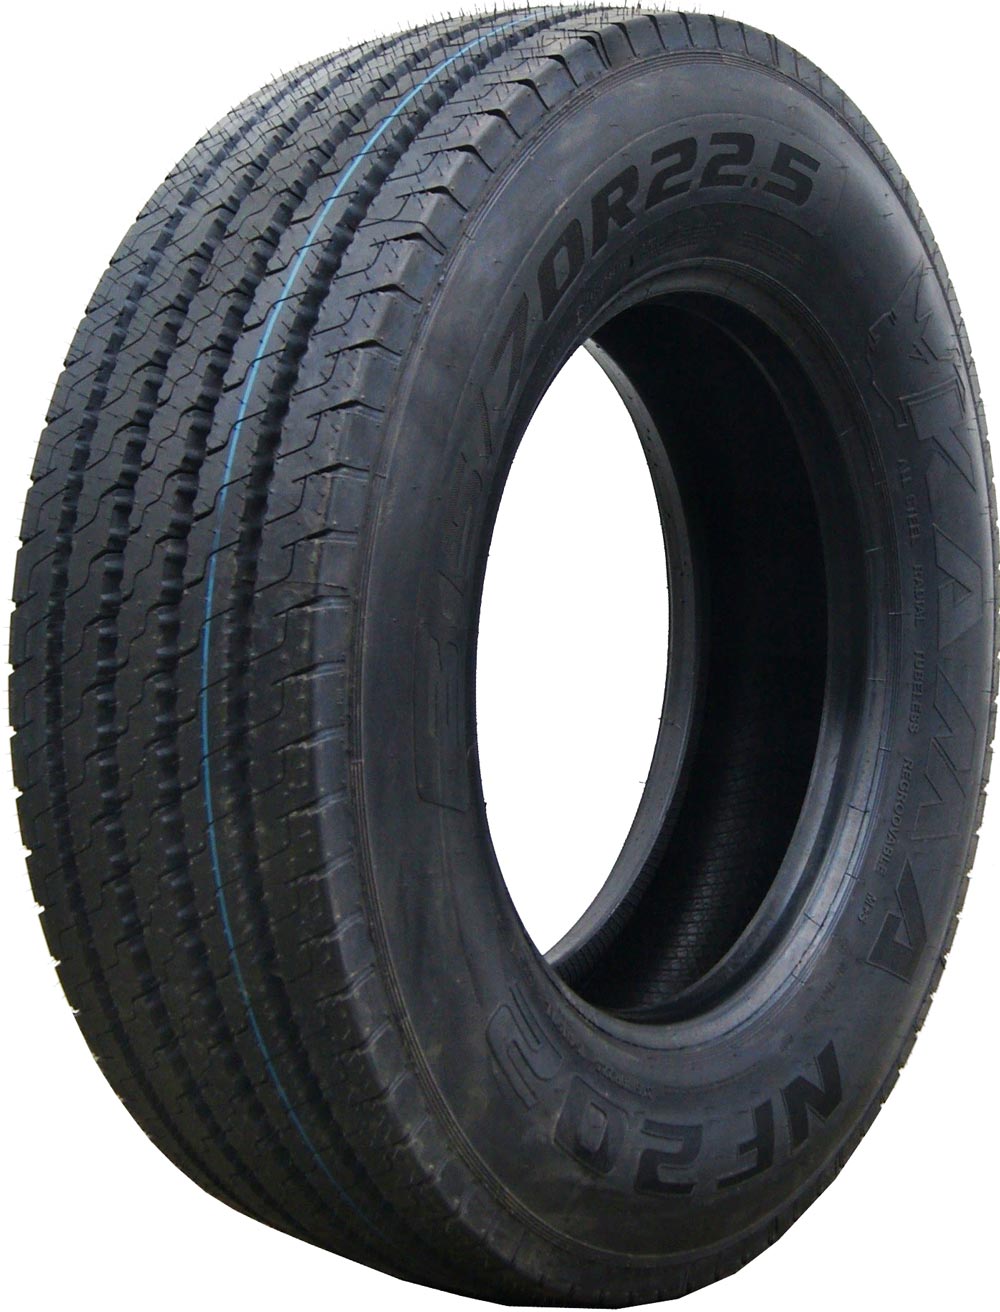 product_type-heavy_tires KAMA NF202 215/75 R17.5 126M